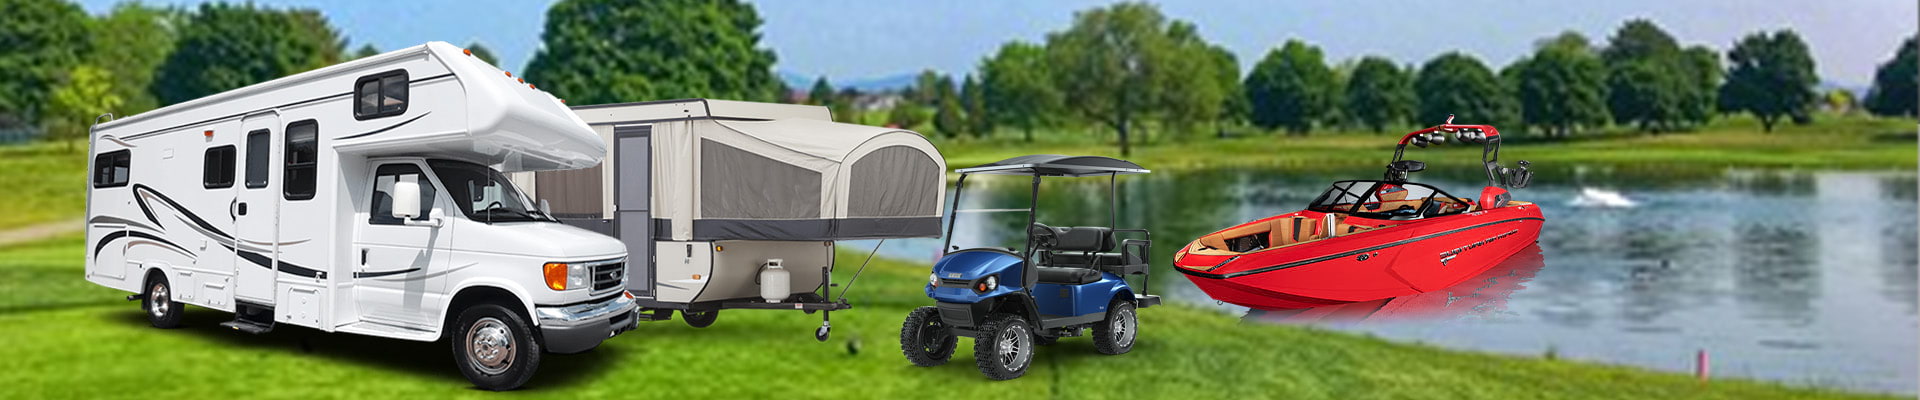 RVs Campers Boats and Carts